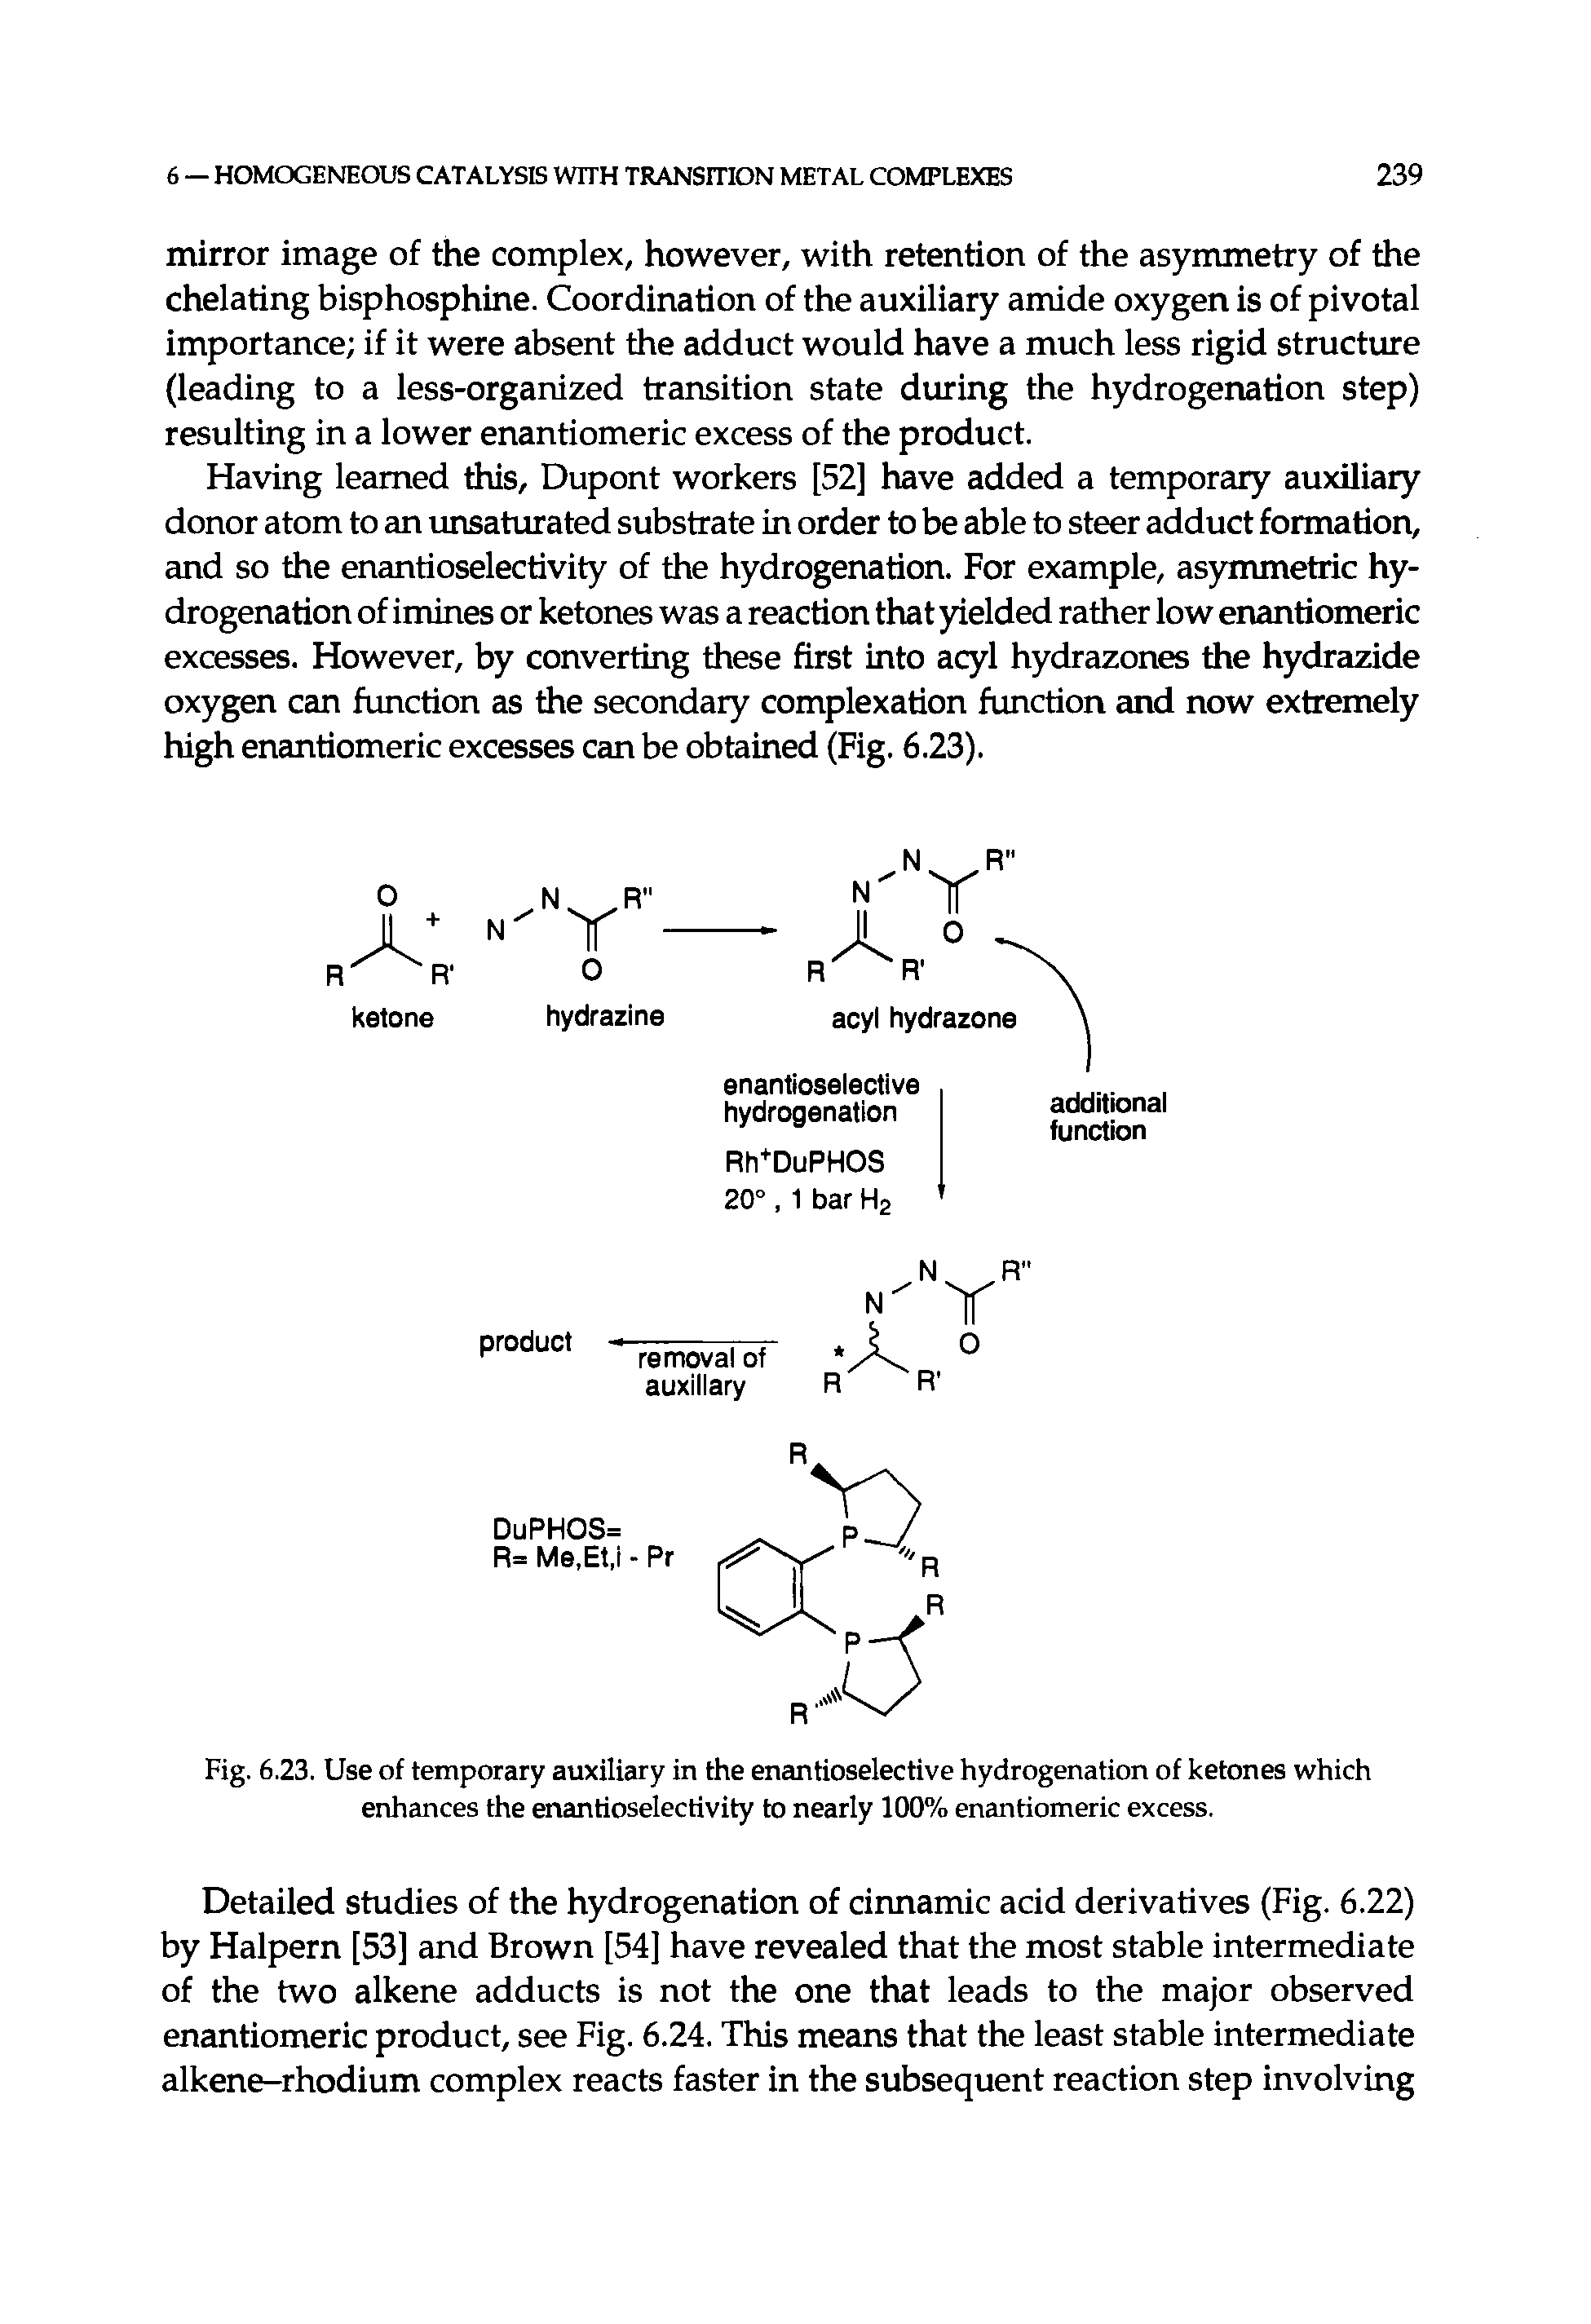 Fig. 6.23. Use of temporary auxiliary in the enantioselective hydrogenation of ketones which enhances the enantioselectivity to nearly 100% enantiomeric excess.